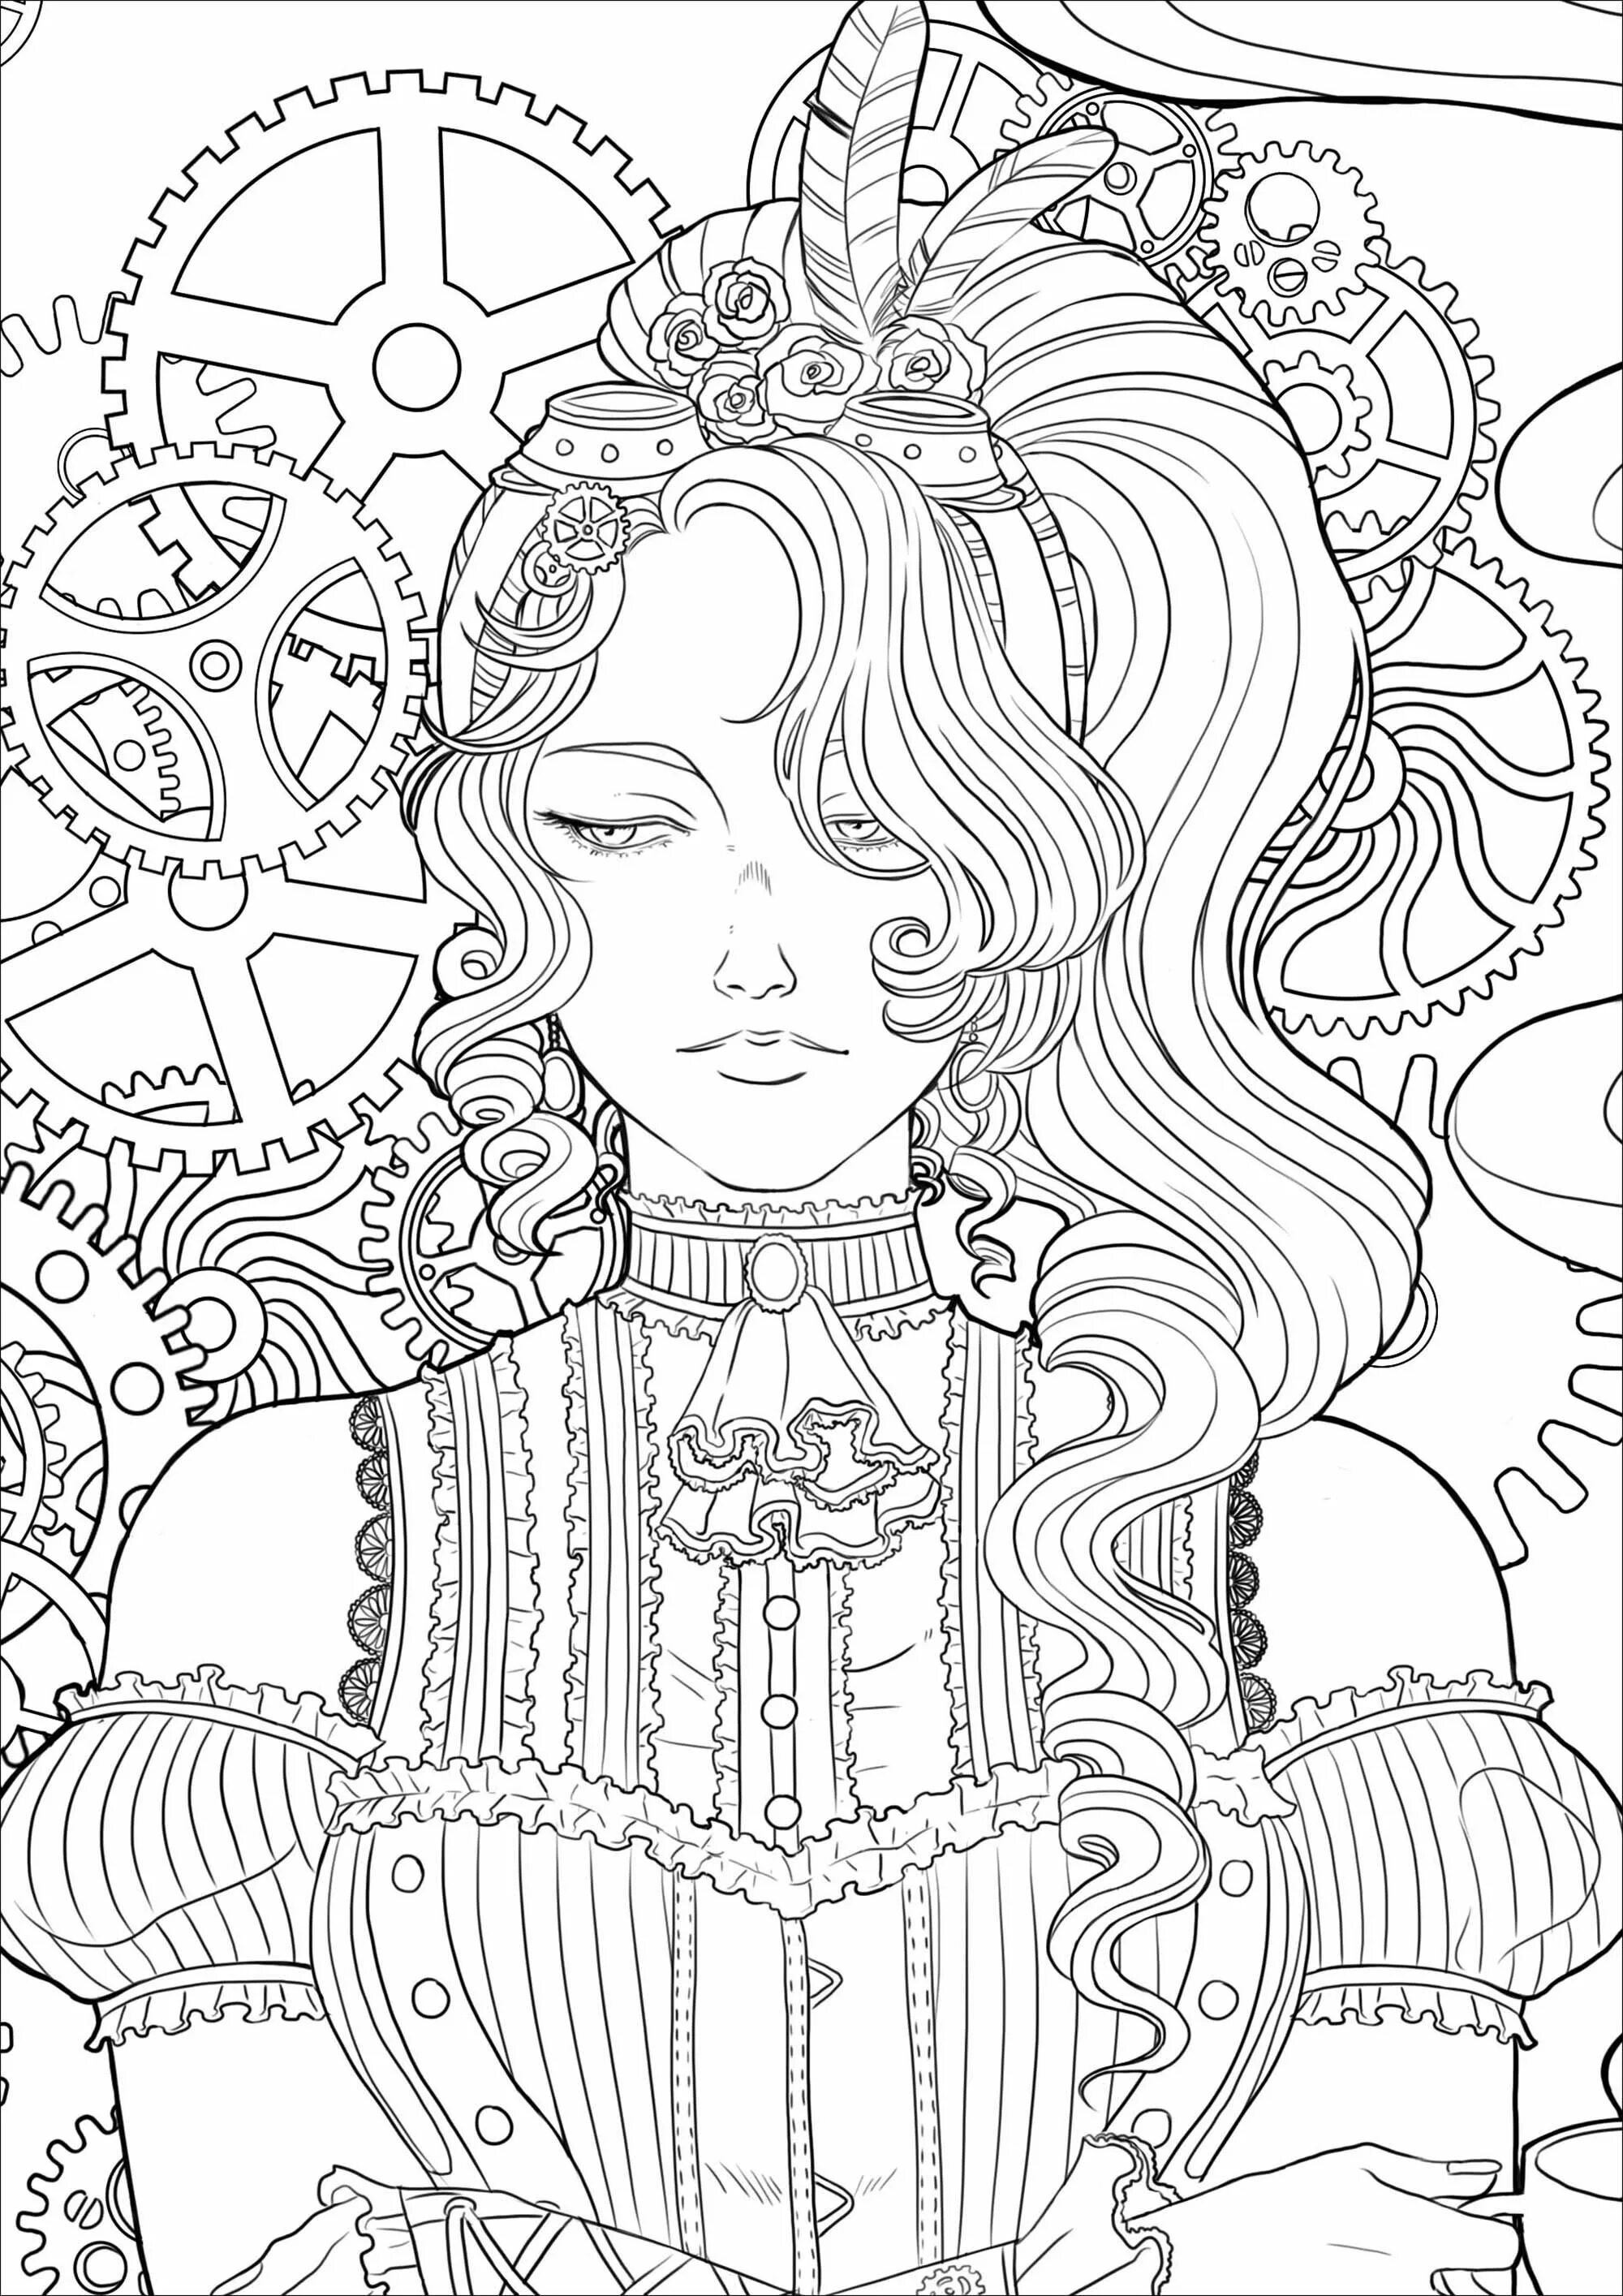 Gorgeous coloring book cool for adults